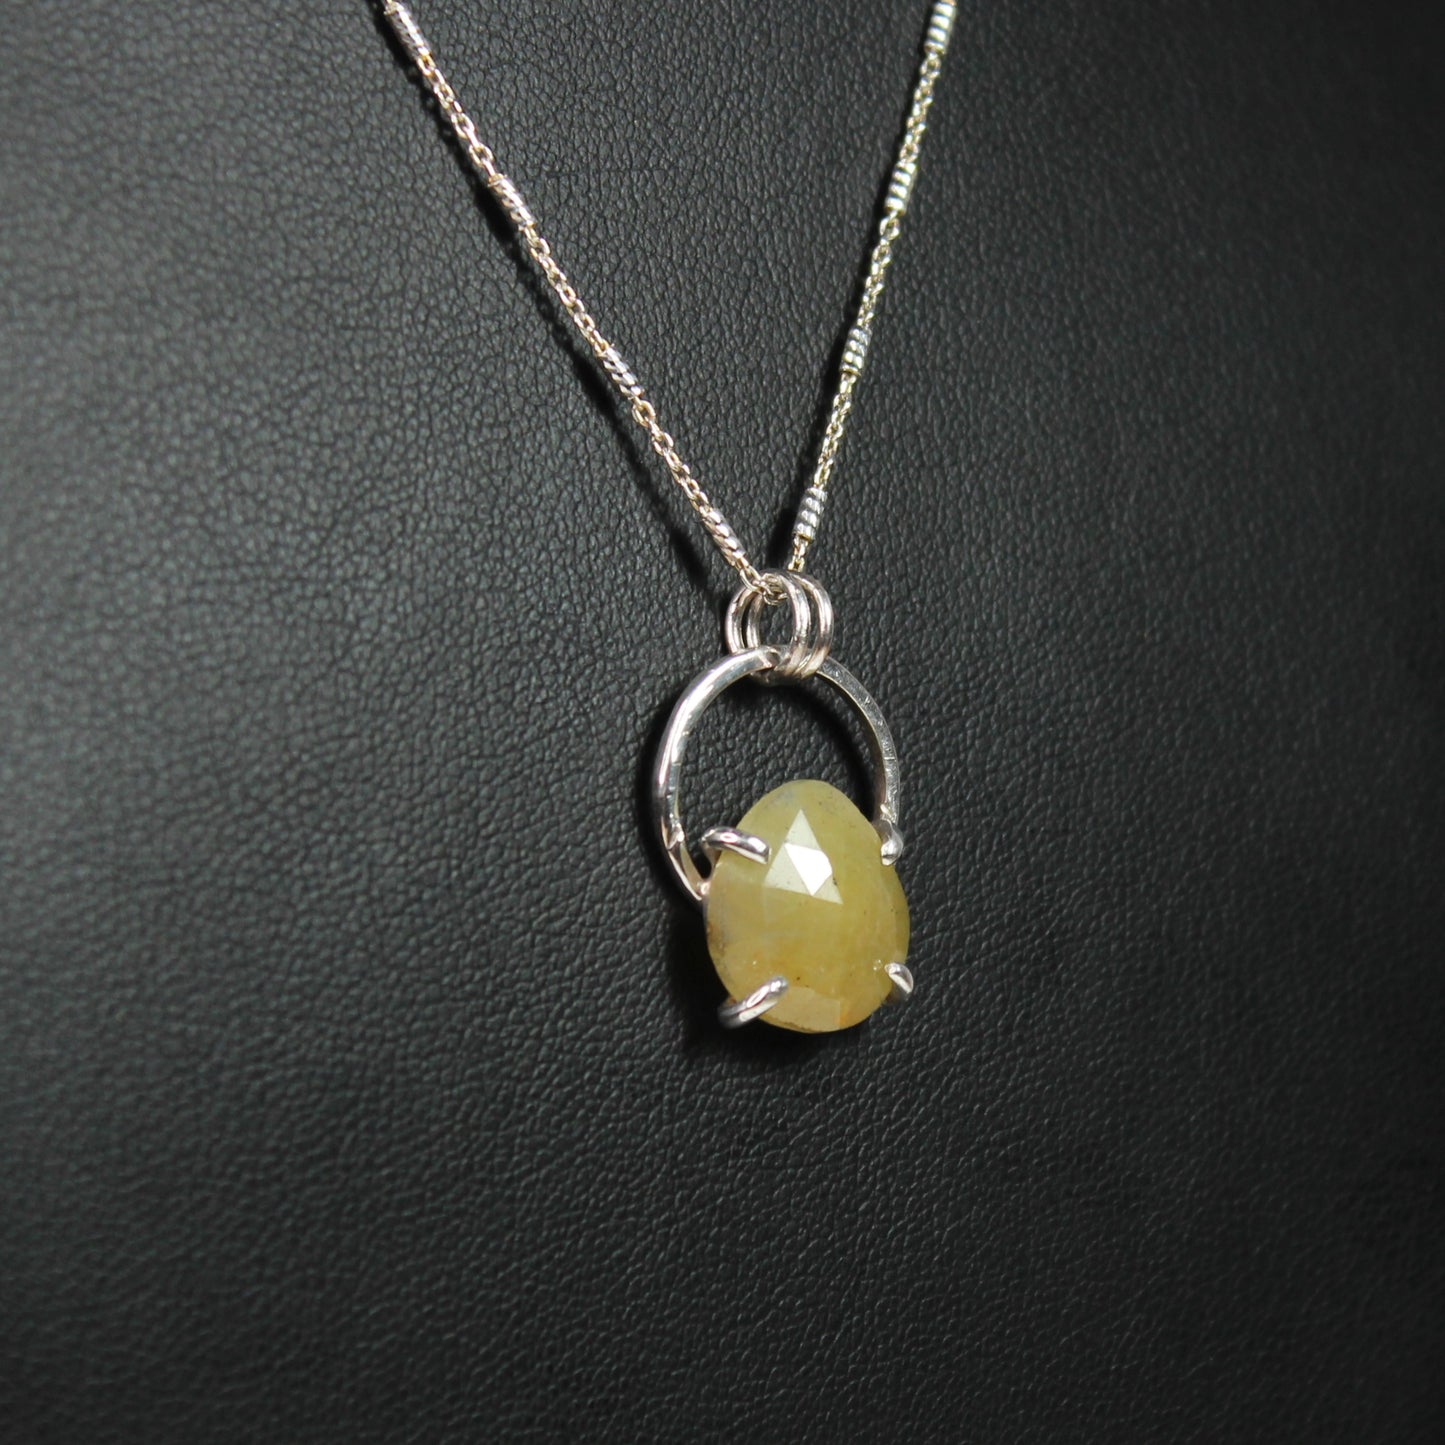 Yellow Sapphire "Halo" Sterling Silver Necklace